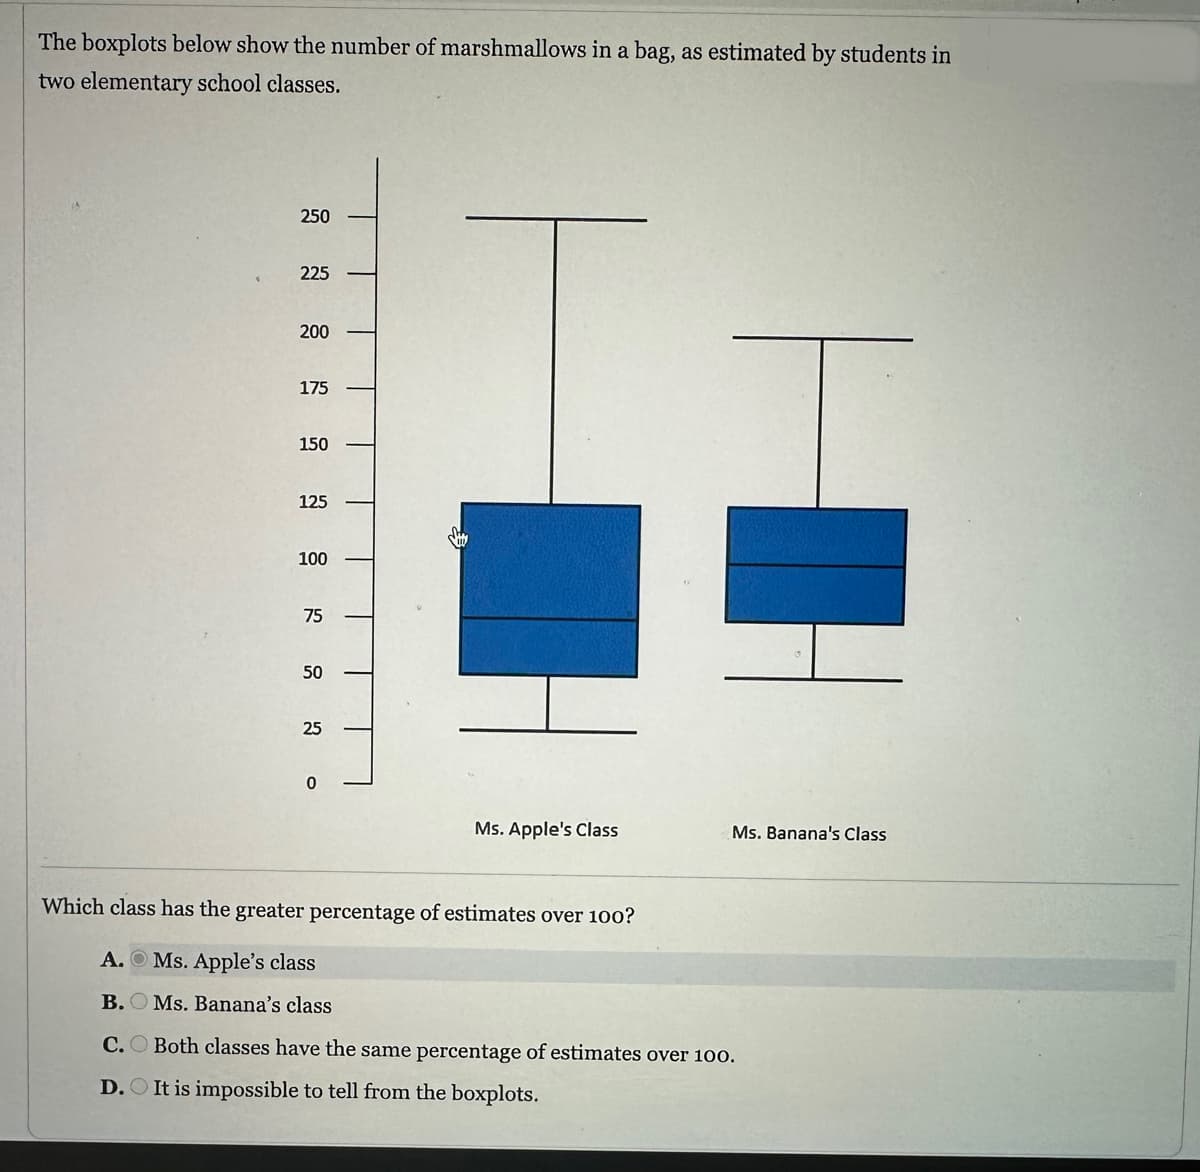 The boxplots below show the number of marshmallows in a bag, as estimated by students in
two elementary school classes.
250
225
200
175
150
125
100
75
50
25
0
L
Ms. Apple's Class
Ms. Banana's Class
Which class has the greater percentage of estimates over 100?
A. Ms. Apple's class
B. Ms. Banana's class
C. Both classes have the same percentage of estimates over 100.
D. It is impossible to tell from the boxplots.